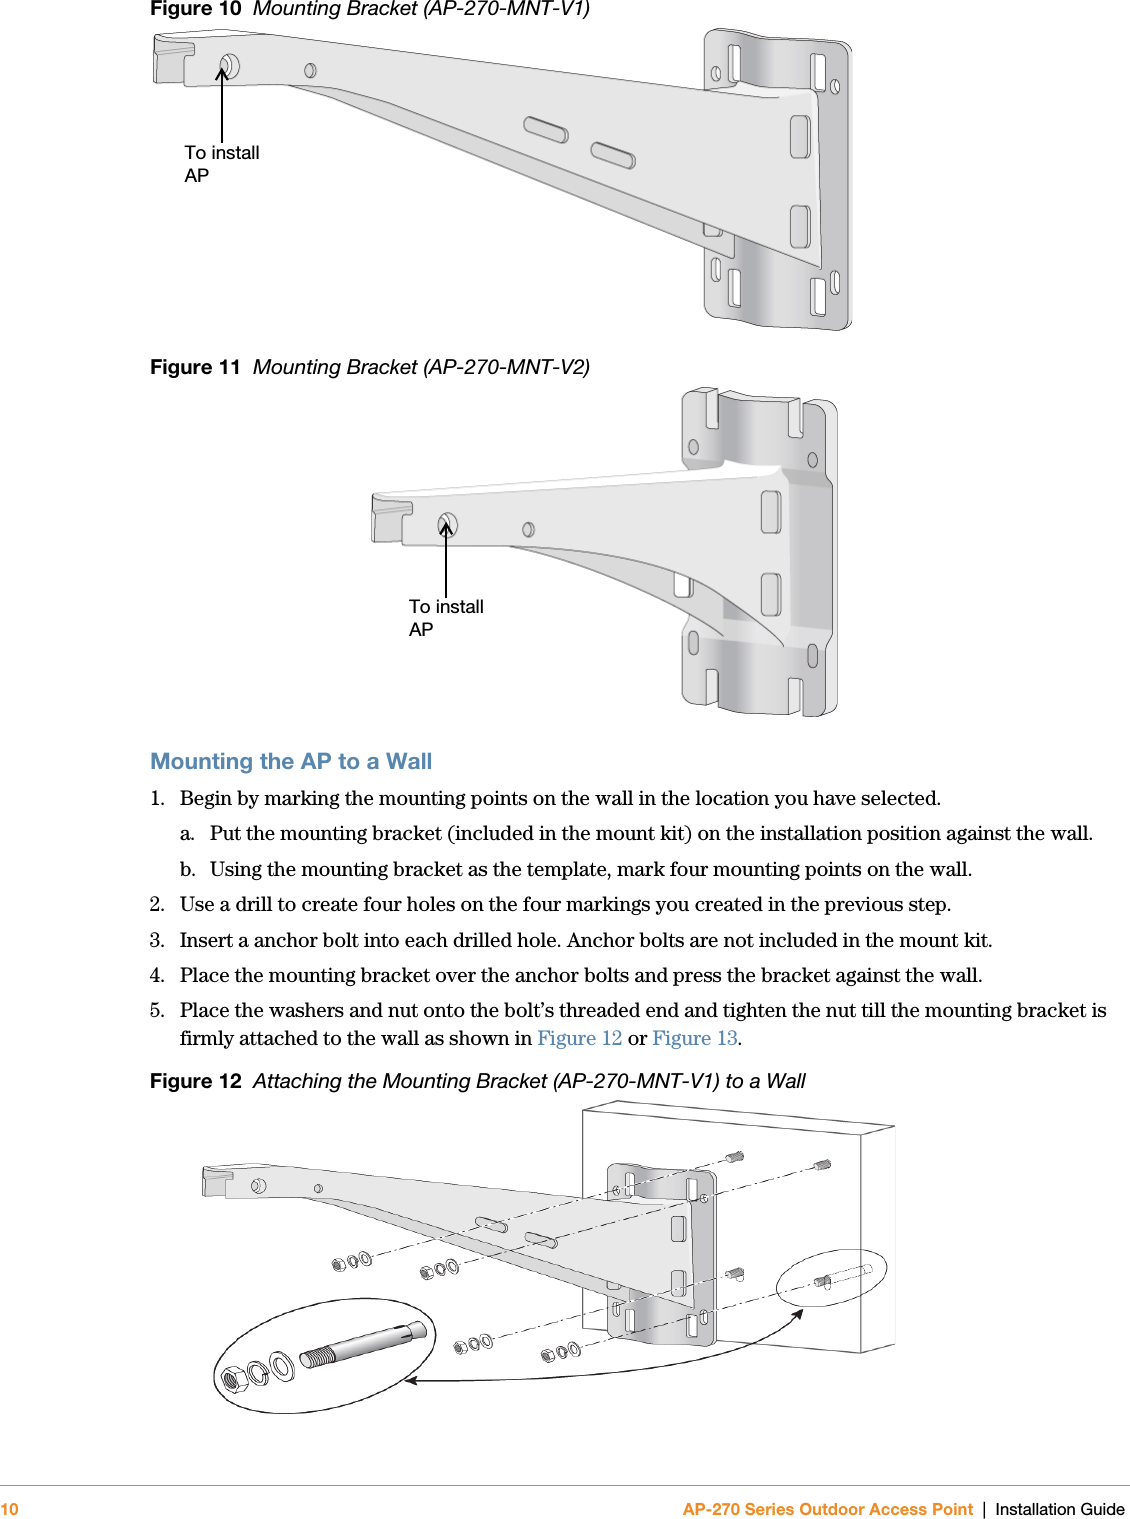 10 AP-270 Series Outdoor Access Point | Installation GuideFigure 10  Mounting Bracket (AP-270-MNT-V1) Figure 11  Mounting Bracket (AP-270-MNT-V2) Mounting the AP to a Wall1. Begin by marking the mounting points on the wall in the location you have selected.a. Put the mounting bracket (included in the mount kit) on the installation position against the wall.b. Using the mounting bracket as the template, mark four mounting points on the wall. 2. Use a drill to create four holes on the four markings you created in the previous step.3. Insert a anchor bolt into each drilled hole. Anchor bolts are not included in the mount kit.4. Place the mounting bracket over the anchor bolts and press the bracket against the wall.5. Place the washers and nut onto the bolt’s threaded end and tighten the nut till the mounting bracket is firmly attached to the wall as shown in Figure 12 or Figure 13.Figure 12  Attaching the Mounting Bracket (AP-270-MNT-V1) to a Wall To install APTo install AP